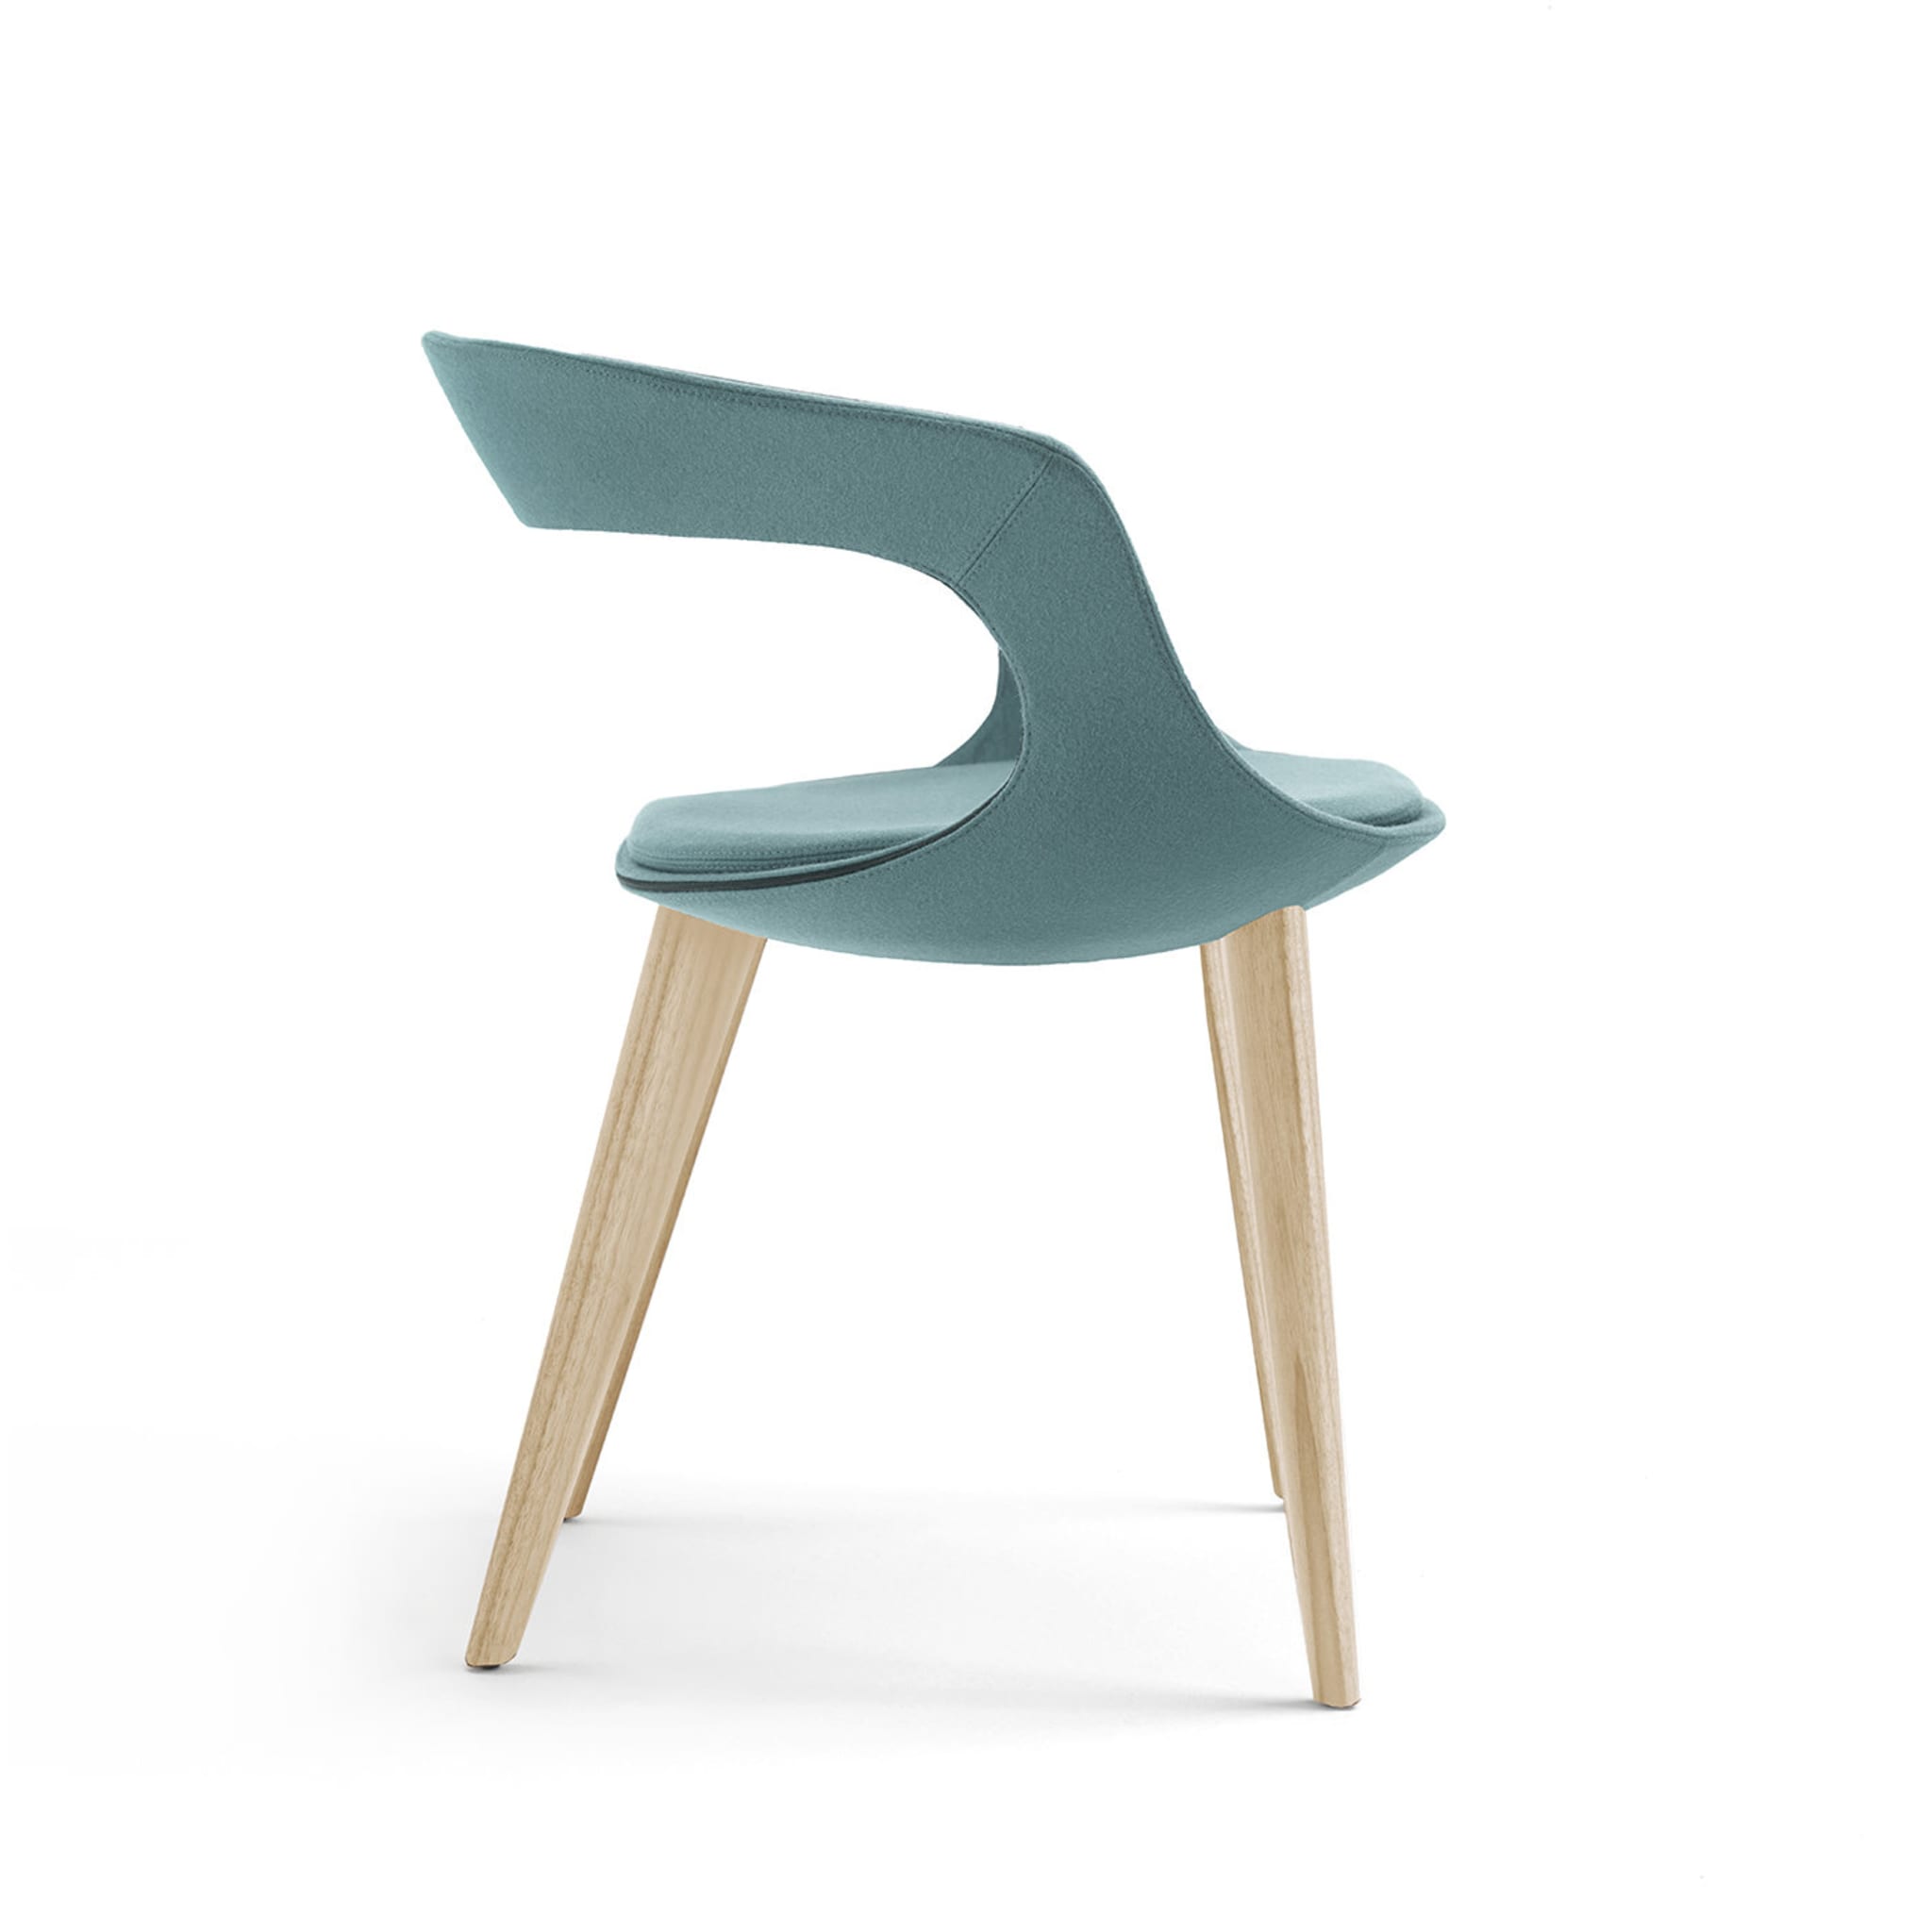 Frenchkiss Low-Backed Wooden-Legged Chair by Stefano Bigi - Alternative view 1